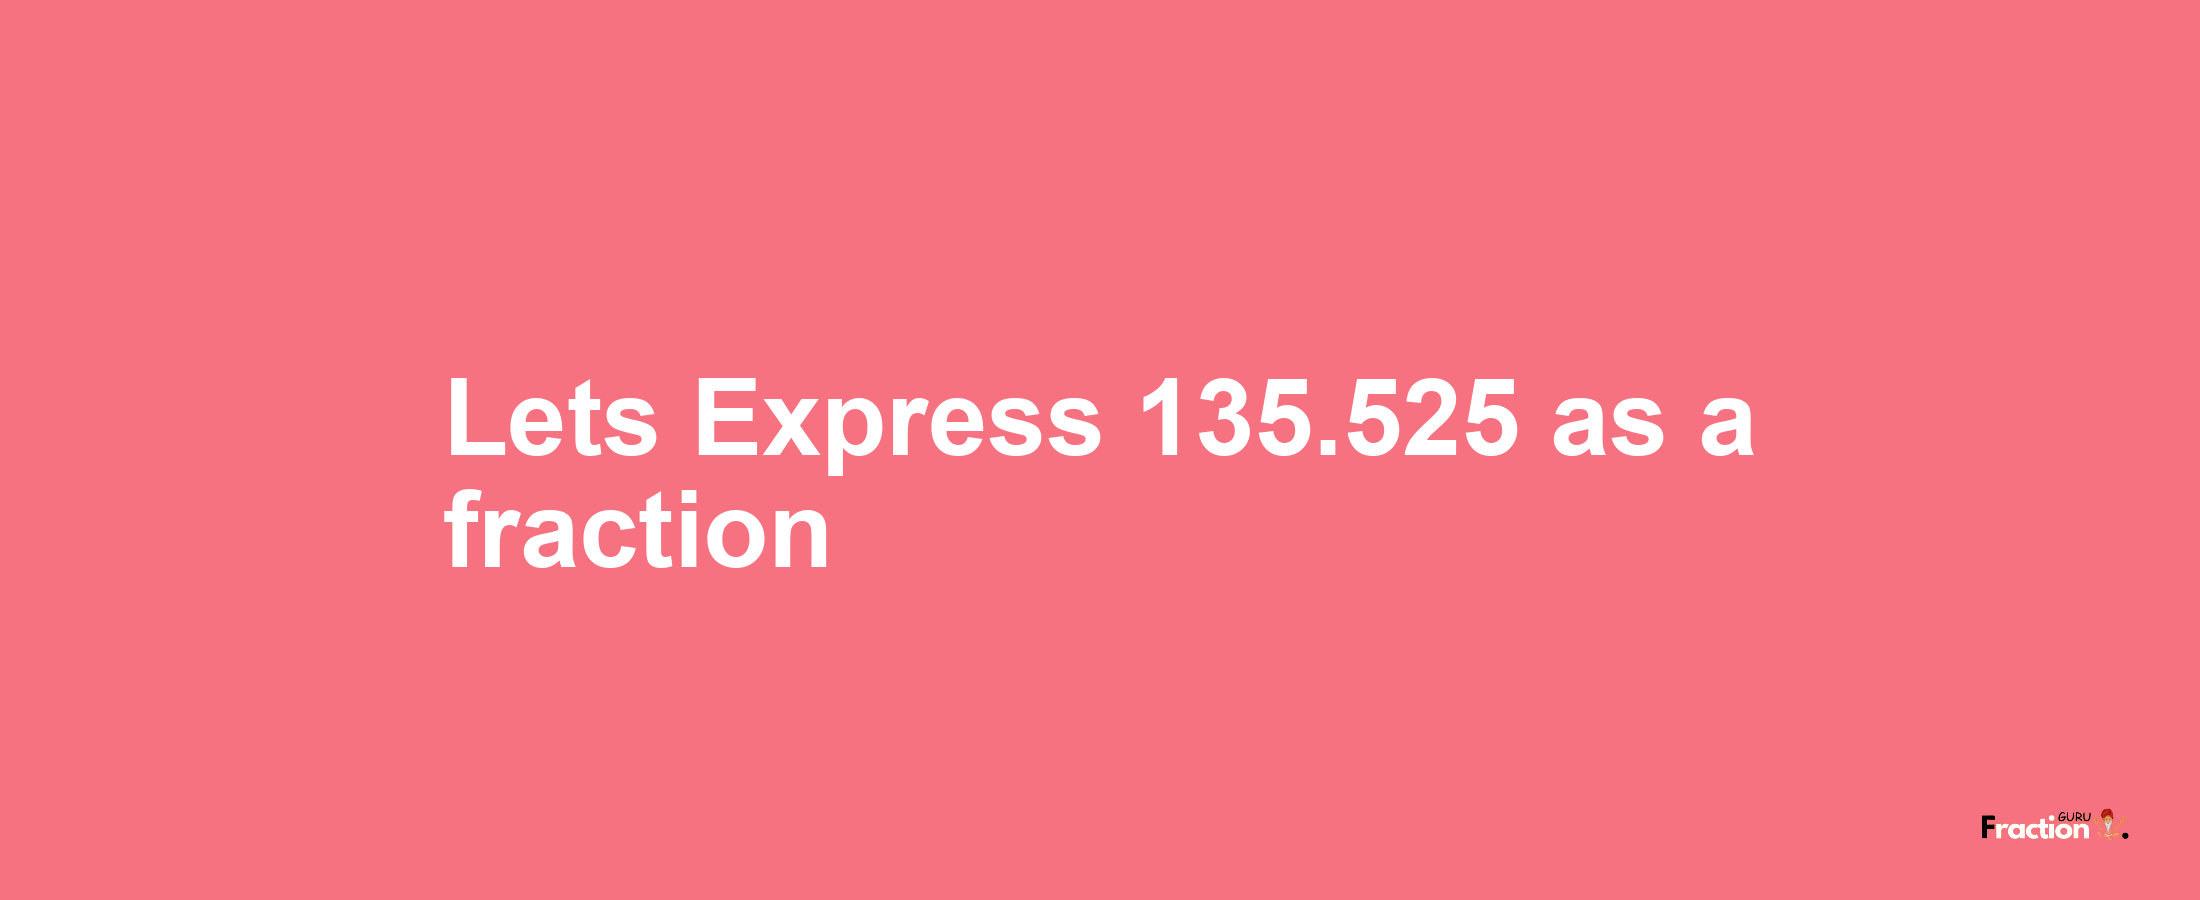 Lets Express 135.525 as afraction